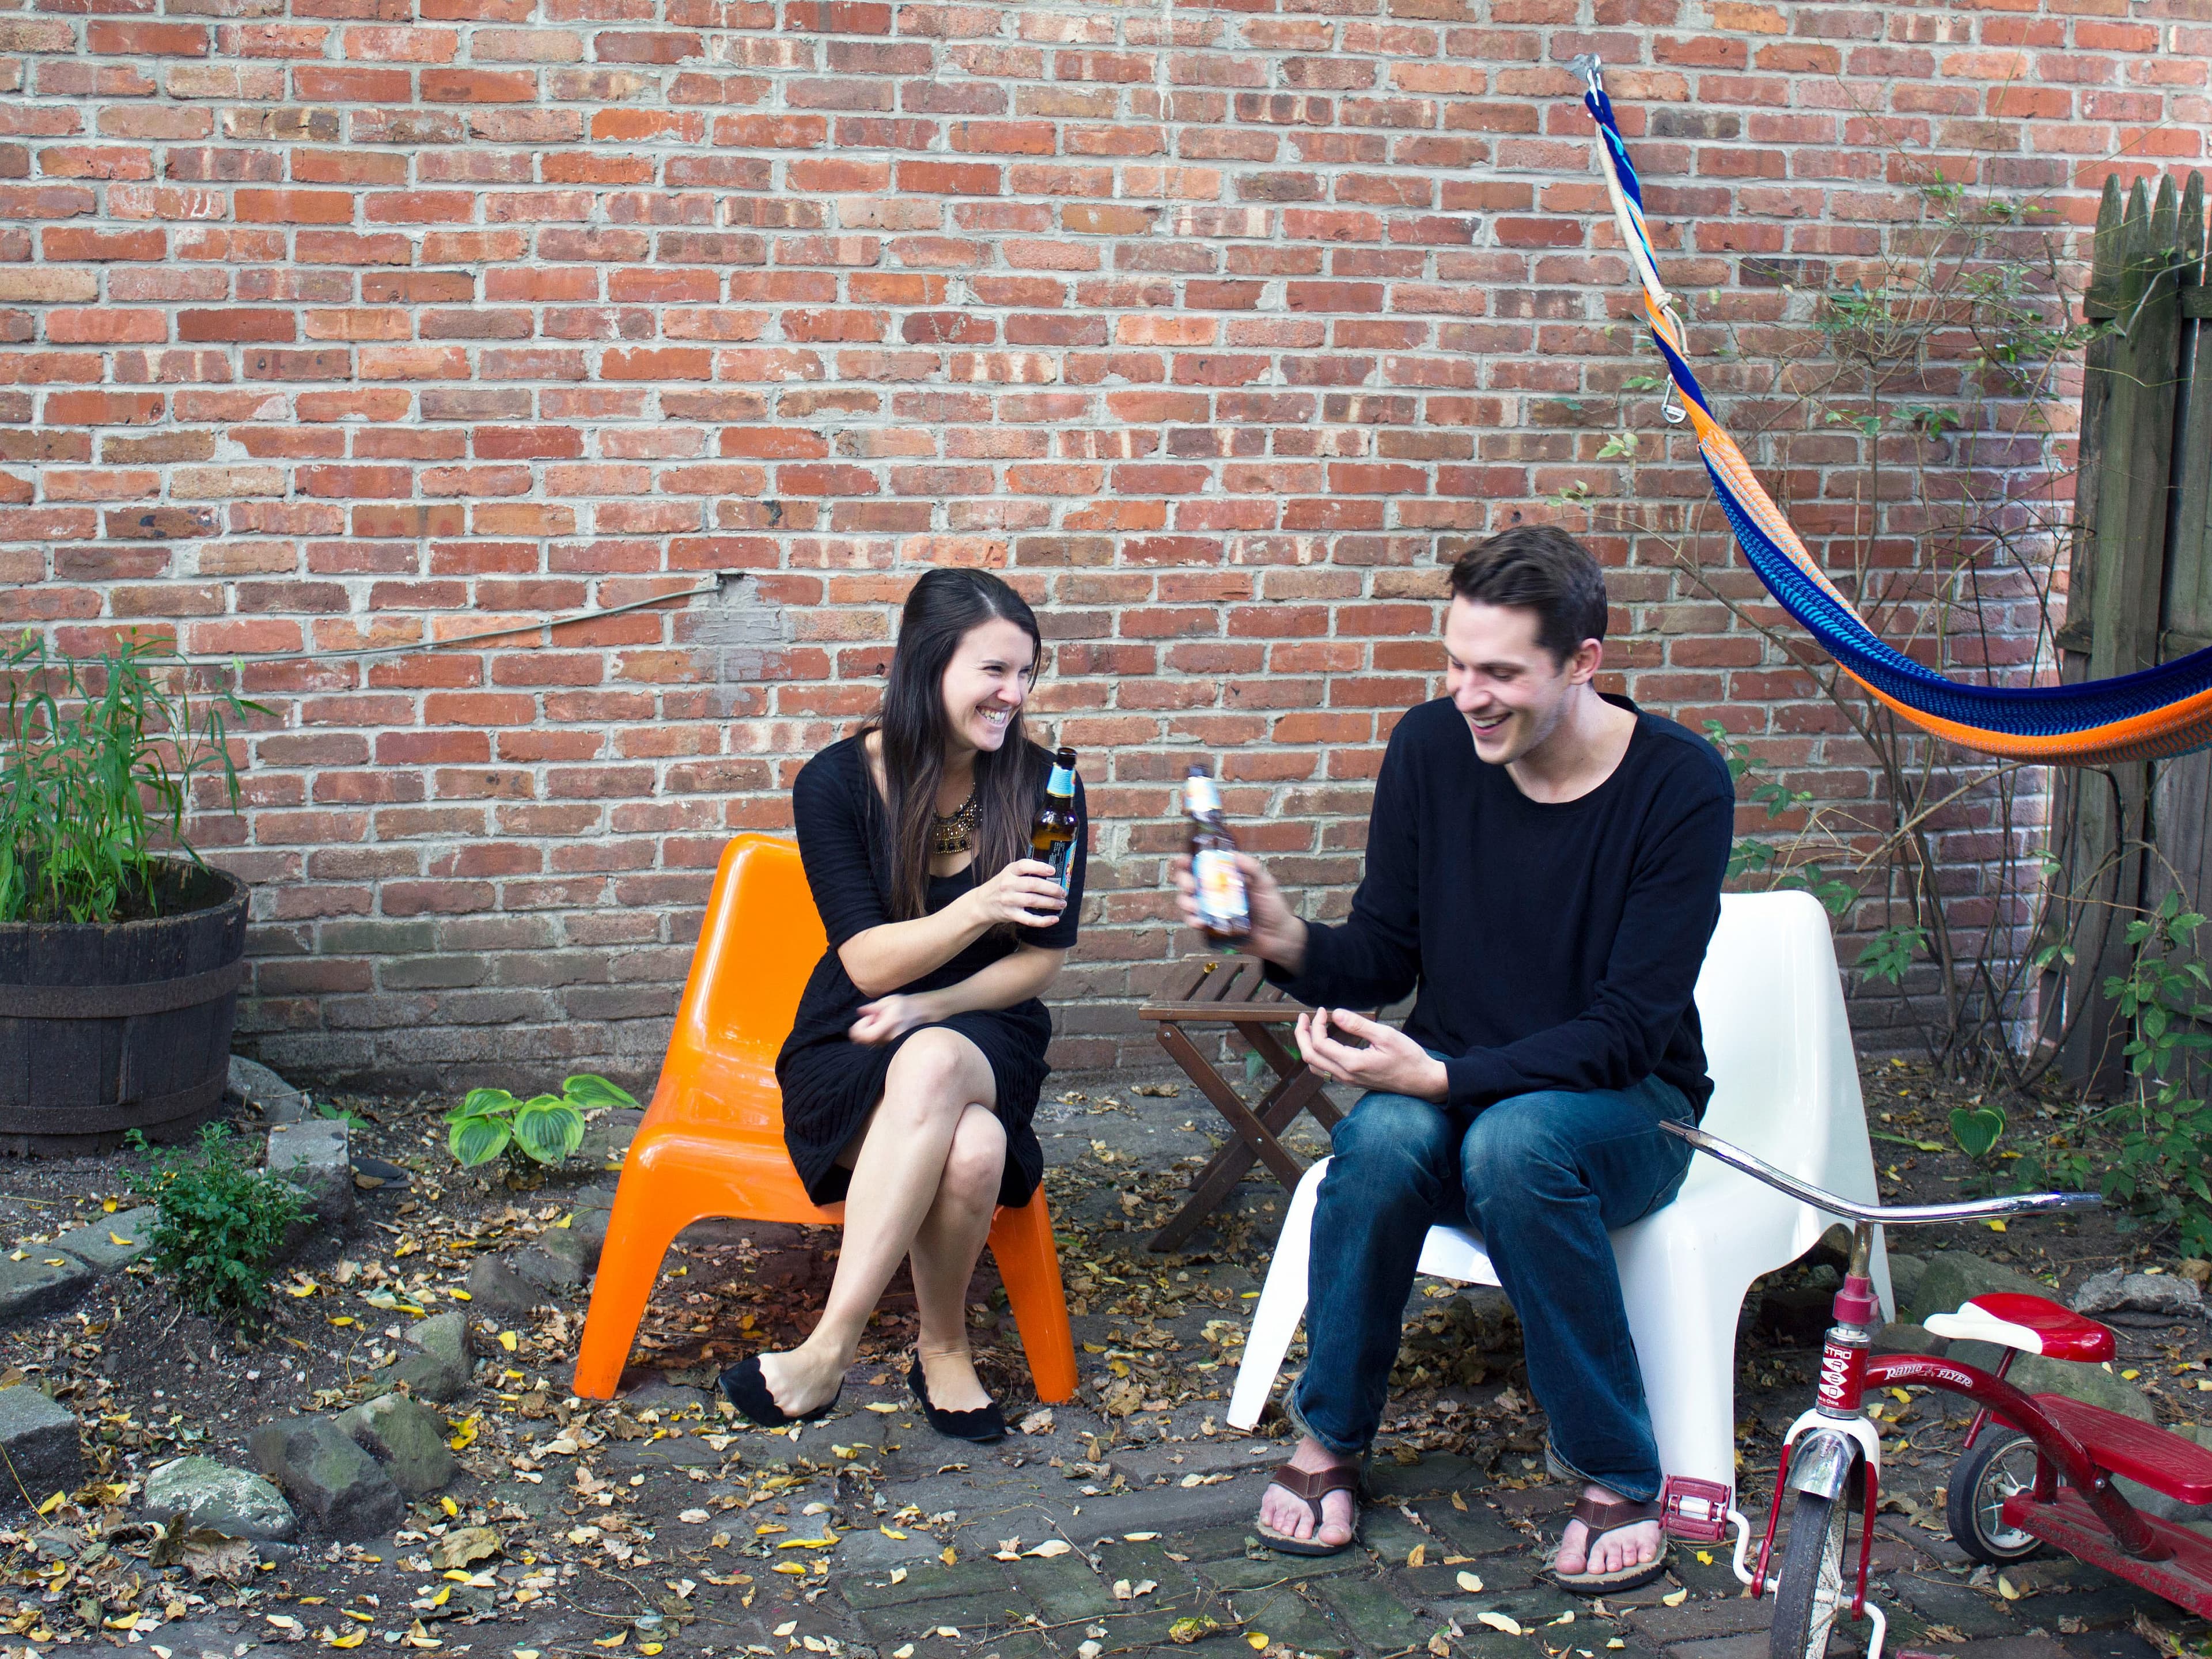 Two people, one in a black dress and one in a black shirt and jeans, are sitting on orange and white chairs in a backyard with a brick wall behind them. They are smiling and holding drinks. There is a hammock, a wooden barrel planter, and a tricycle nearby.